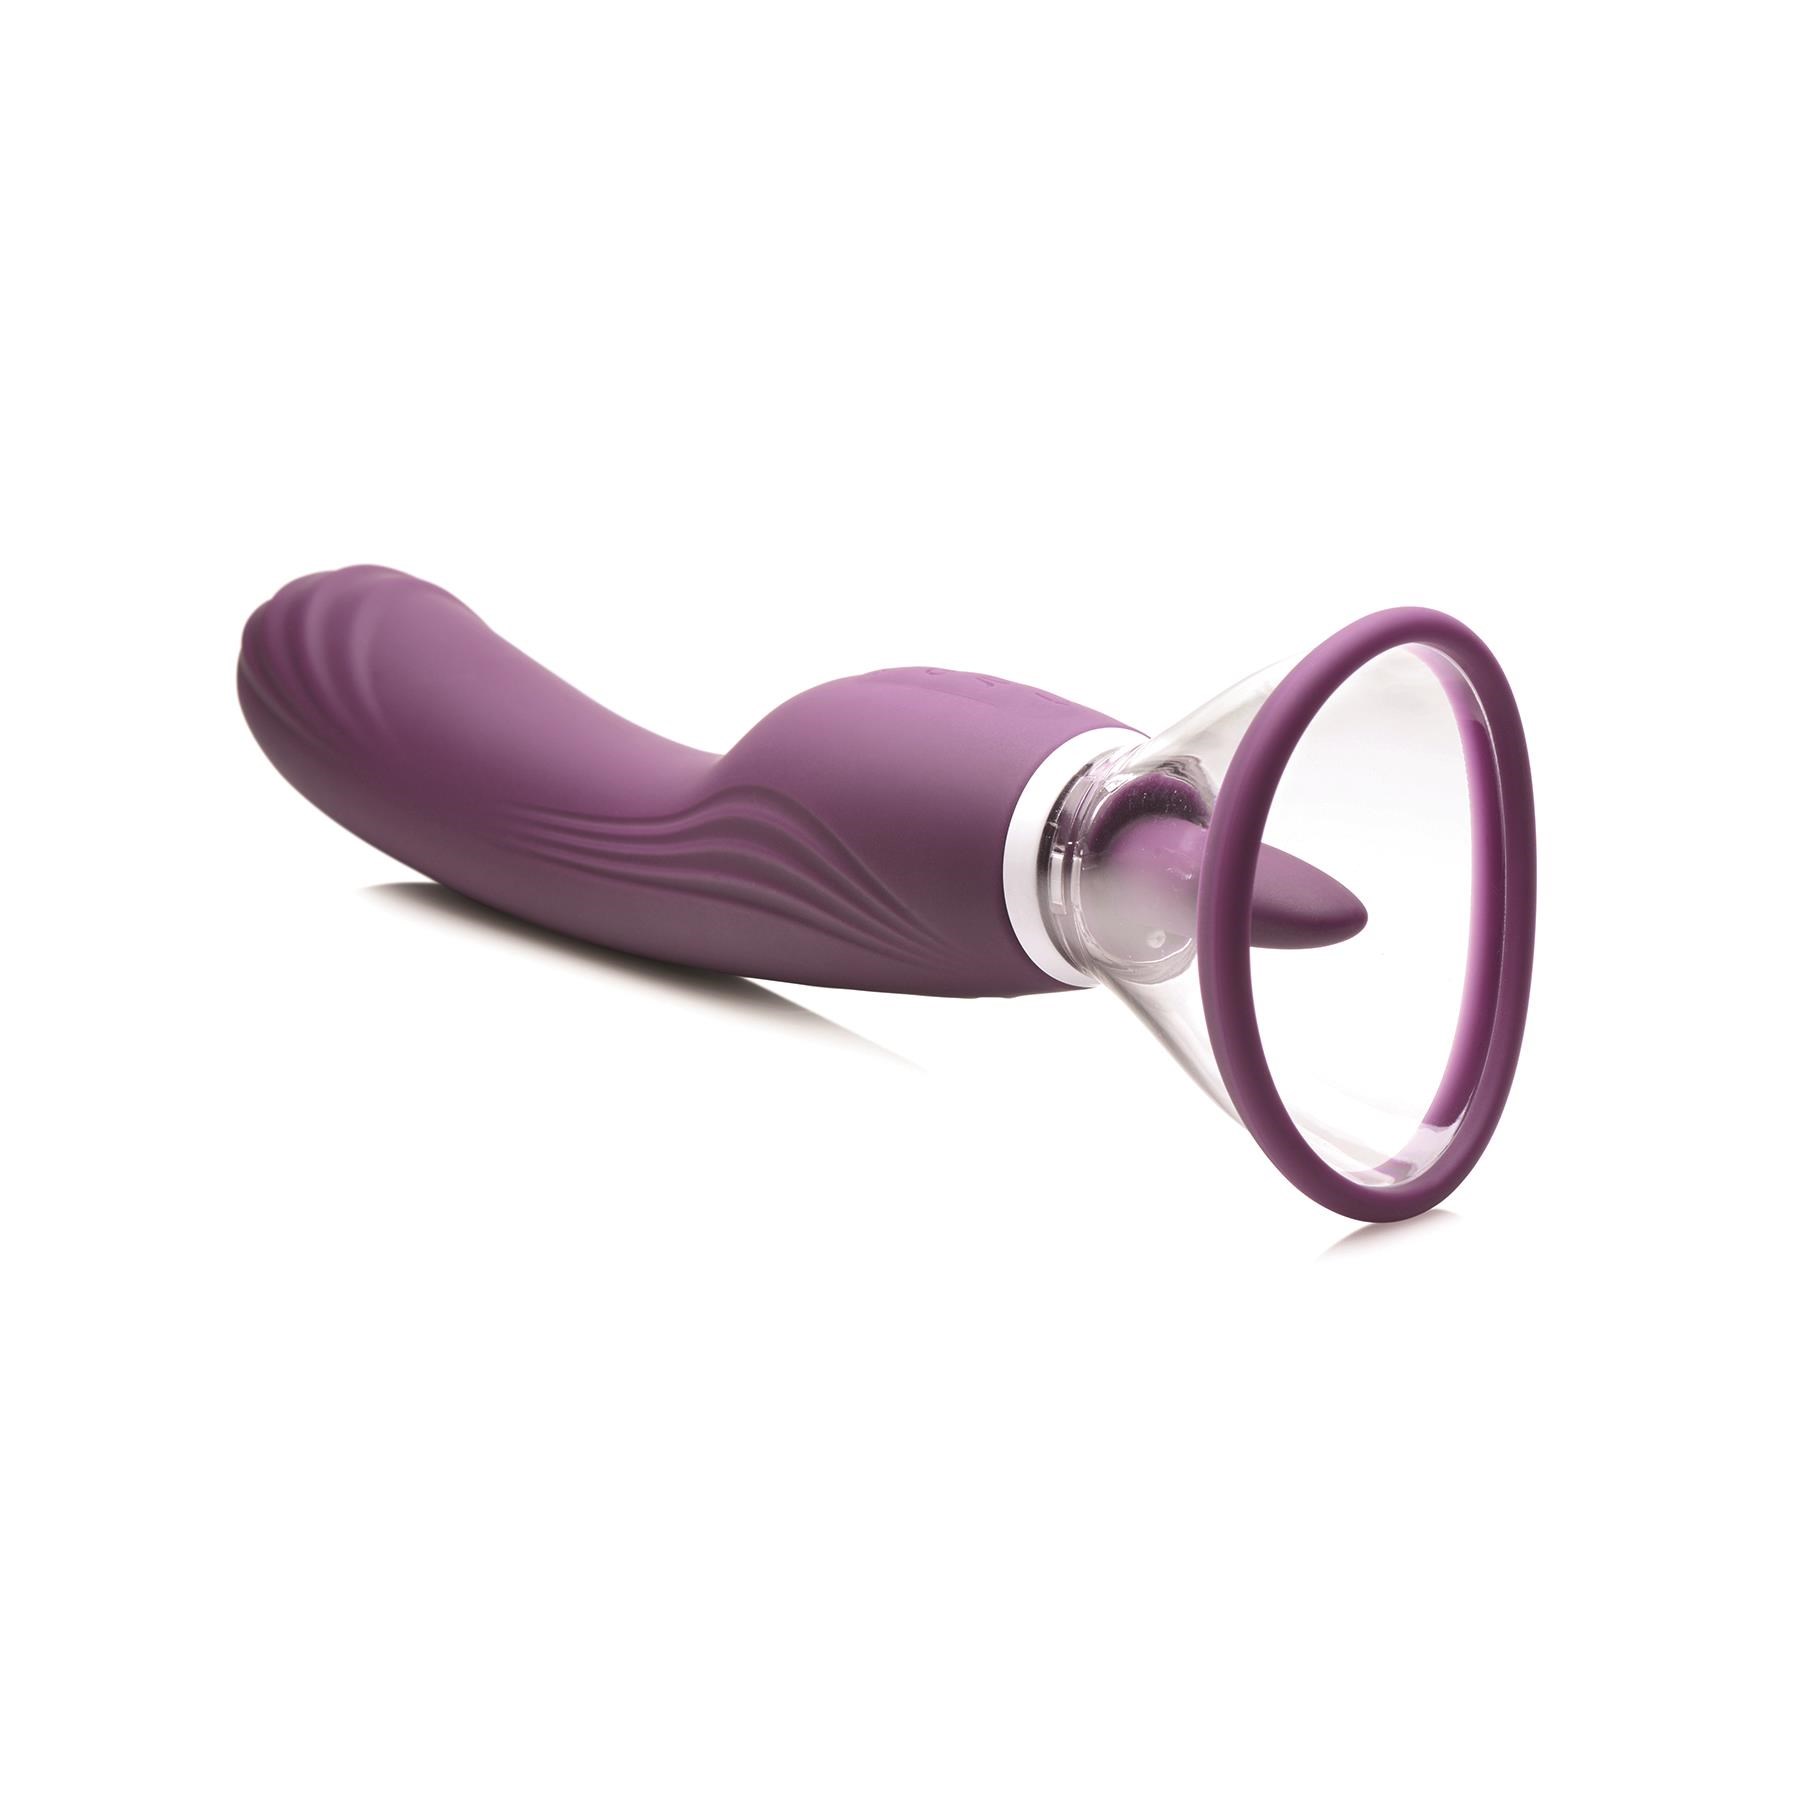 Shegasm Lickgasm Vibrating Pussy Pump with Large Cup